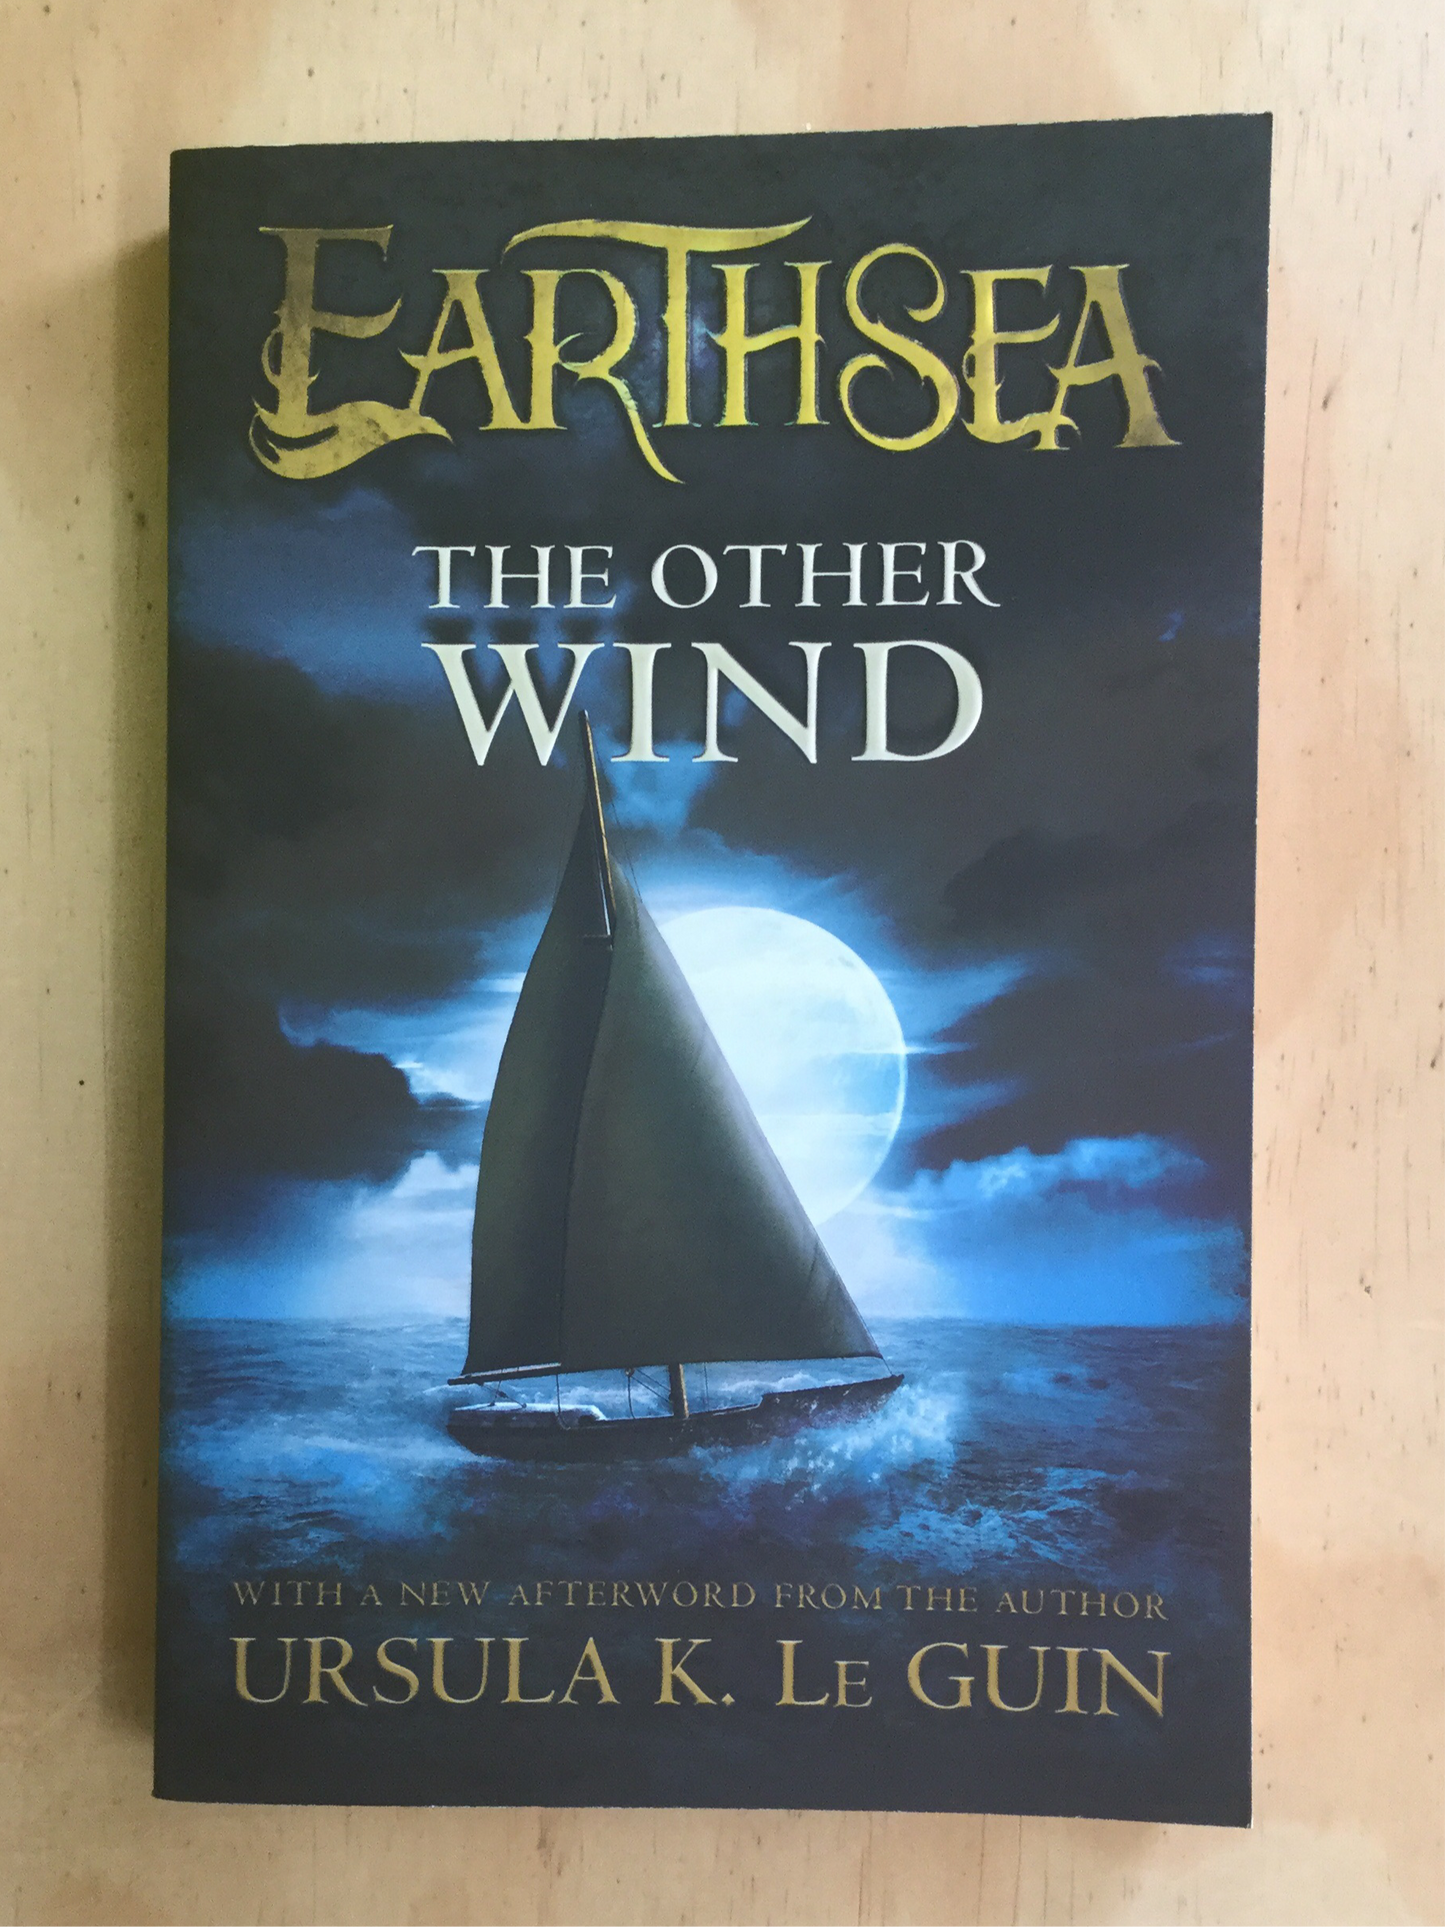 Earthsea: The Other Wind